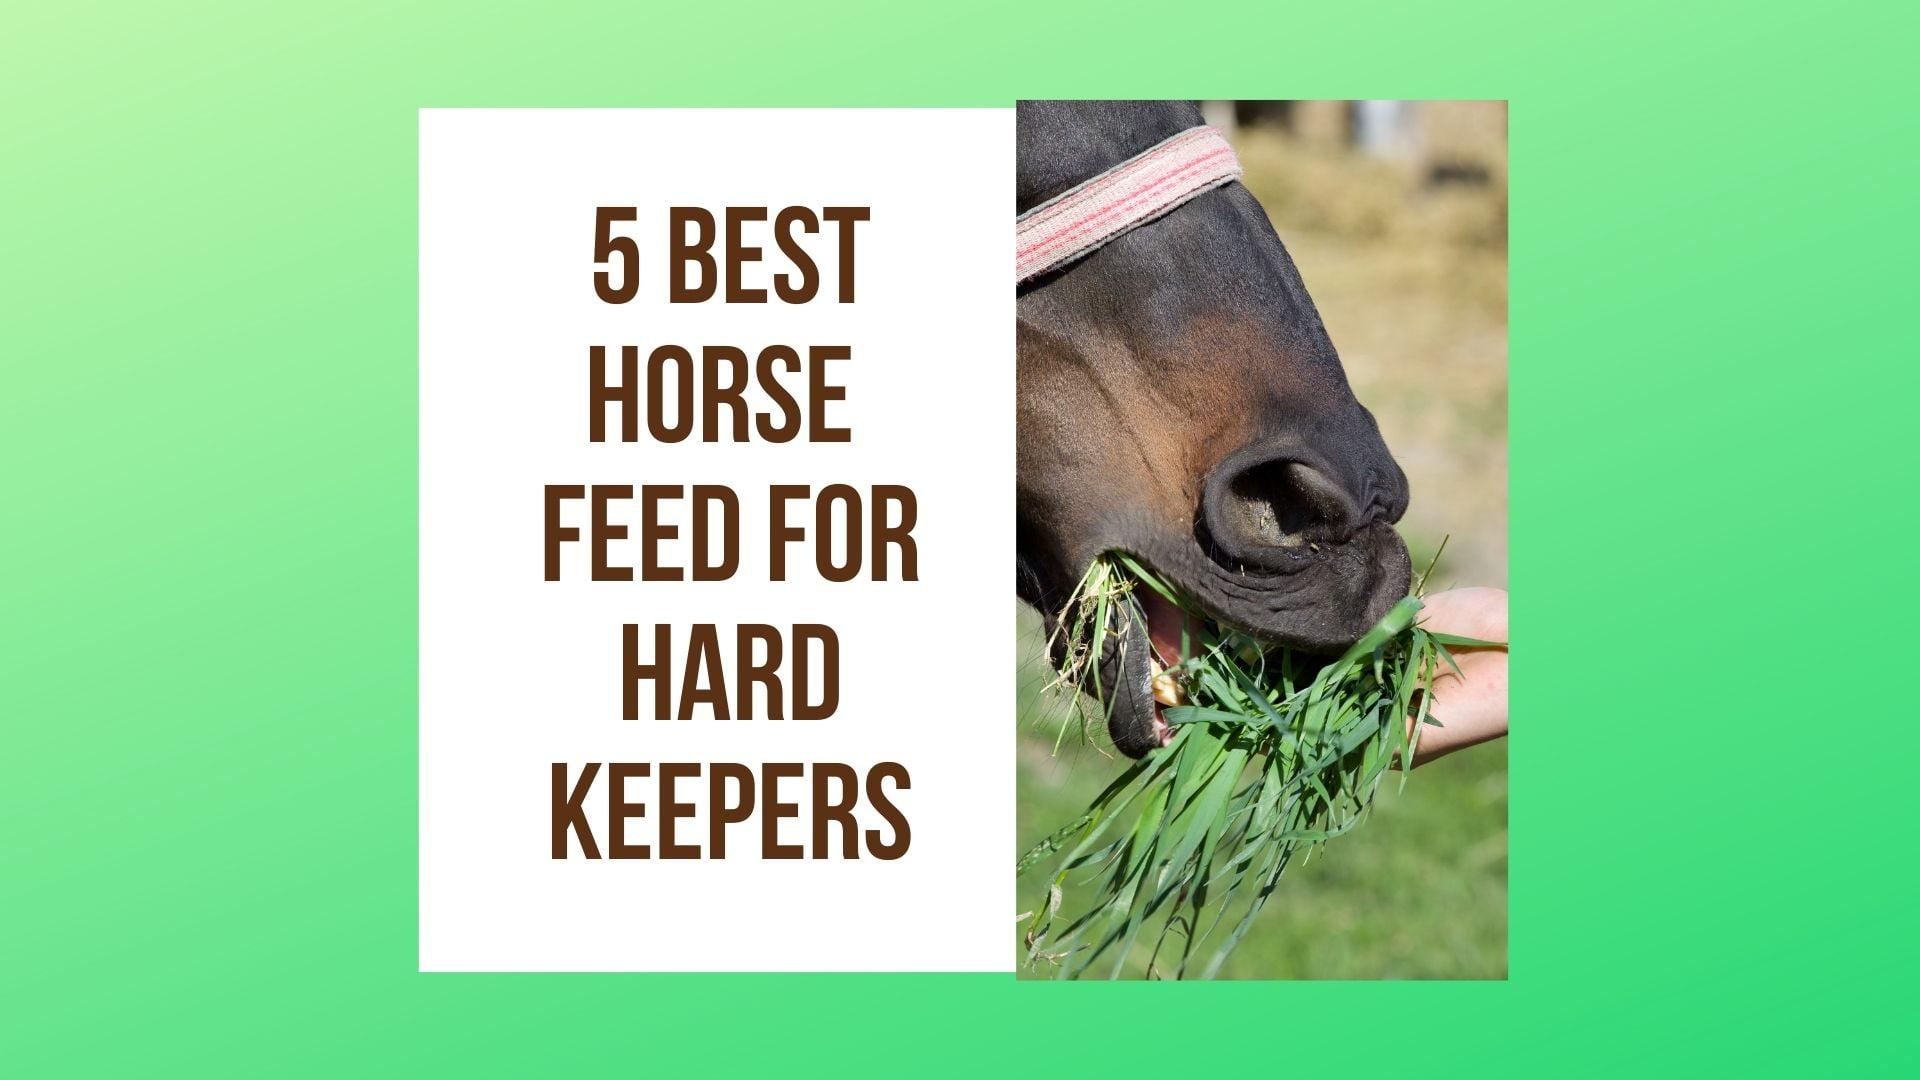 5 Best Horse Feed For Hard Keepers